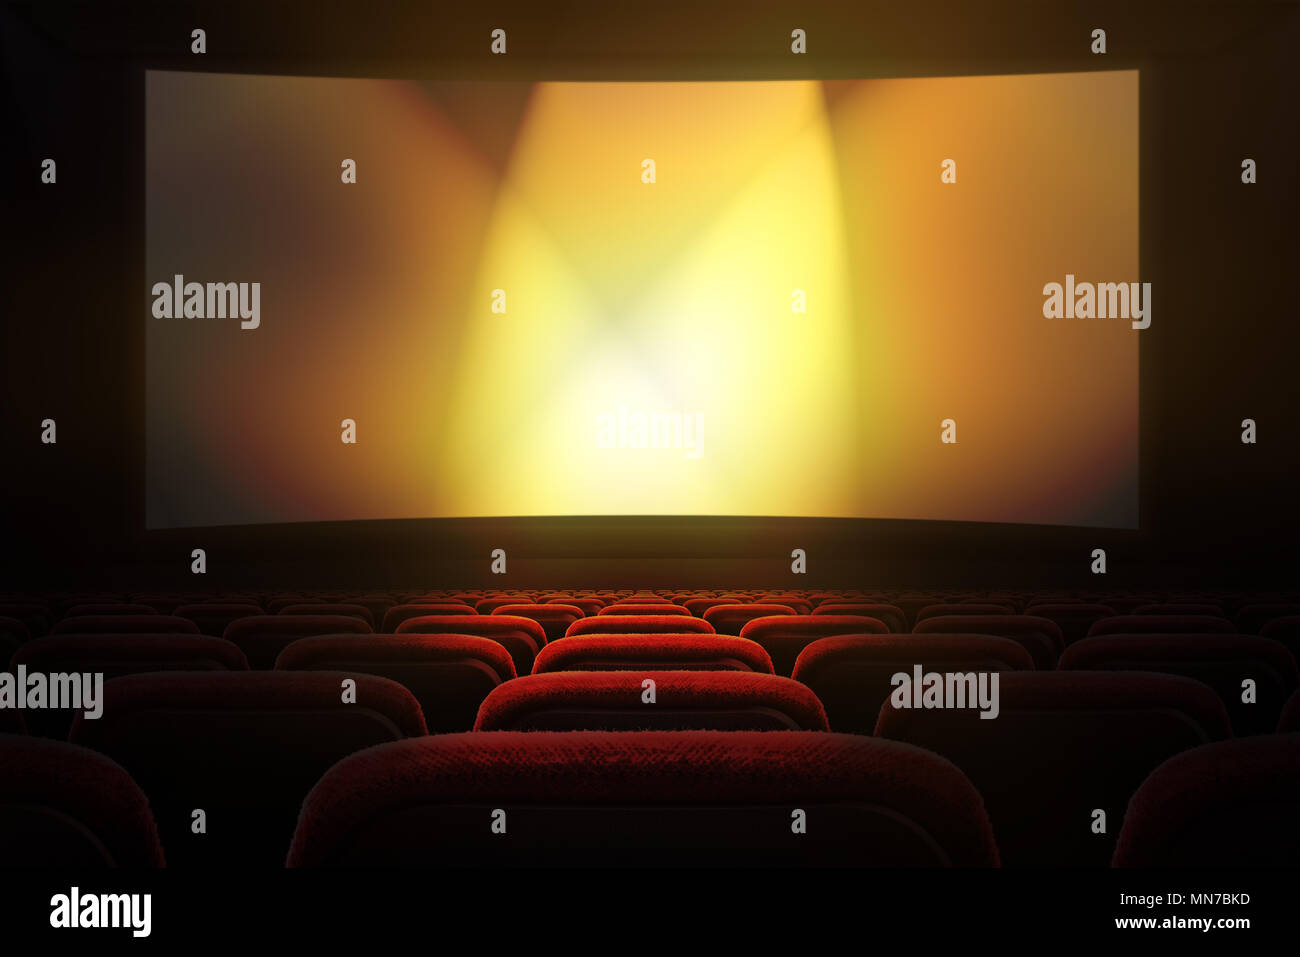 Movie theater with row of red seats and projection screen with golden lights in the background Stock Photo